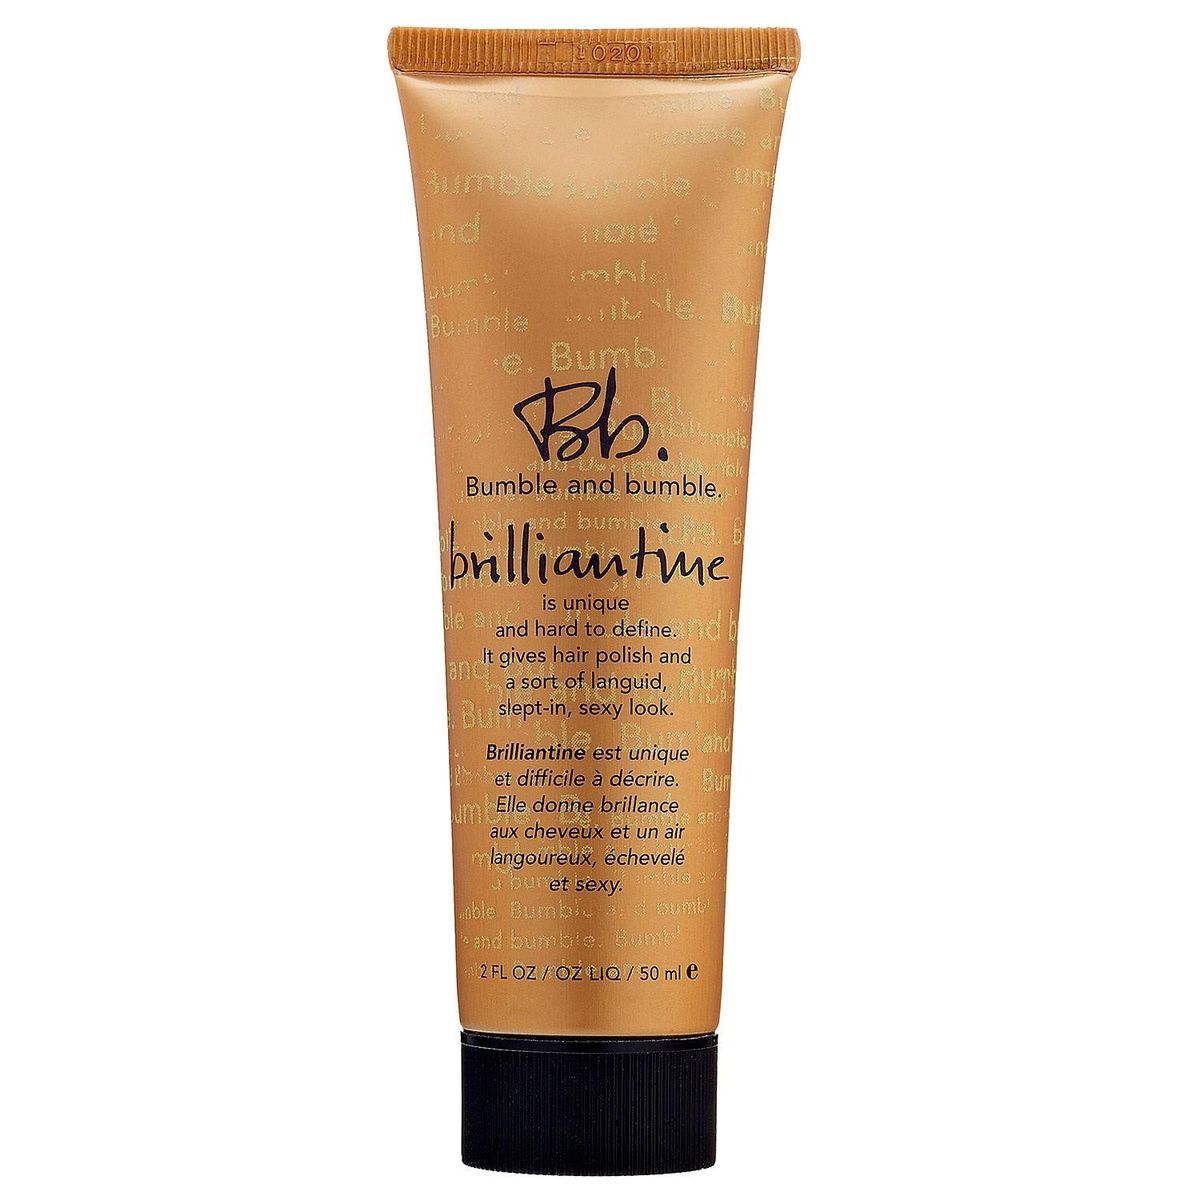 bumble and bumble brilliantine